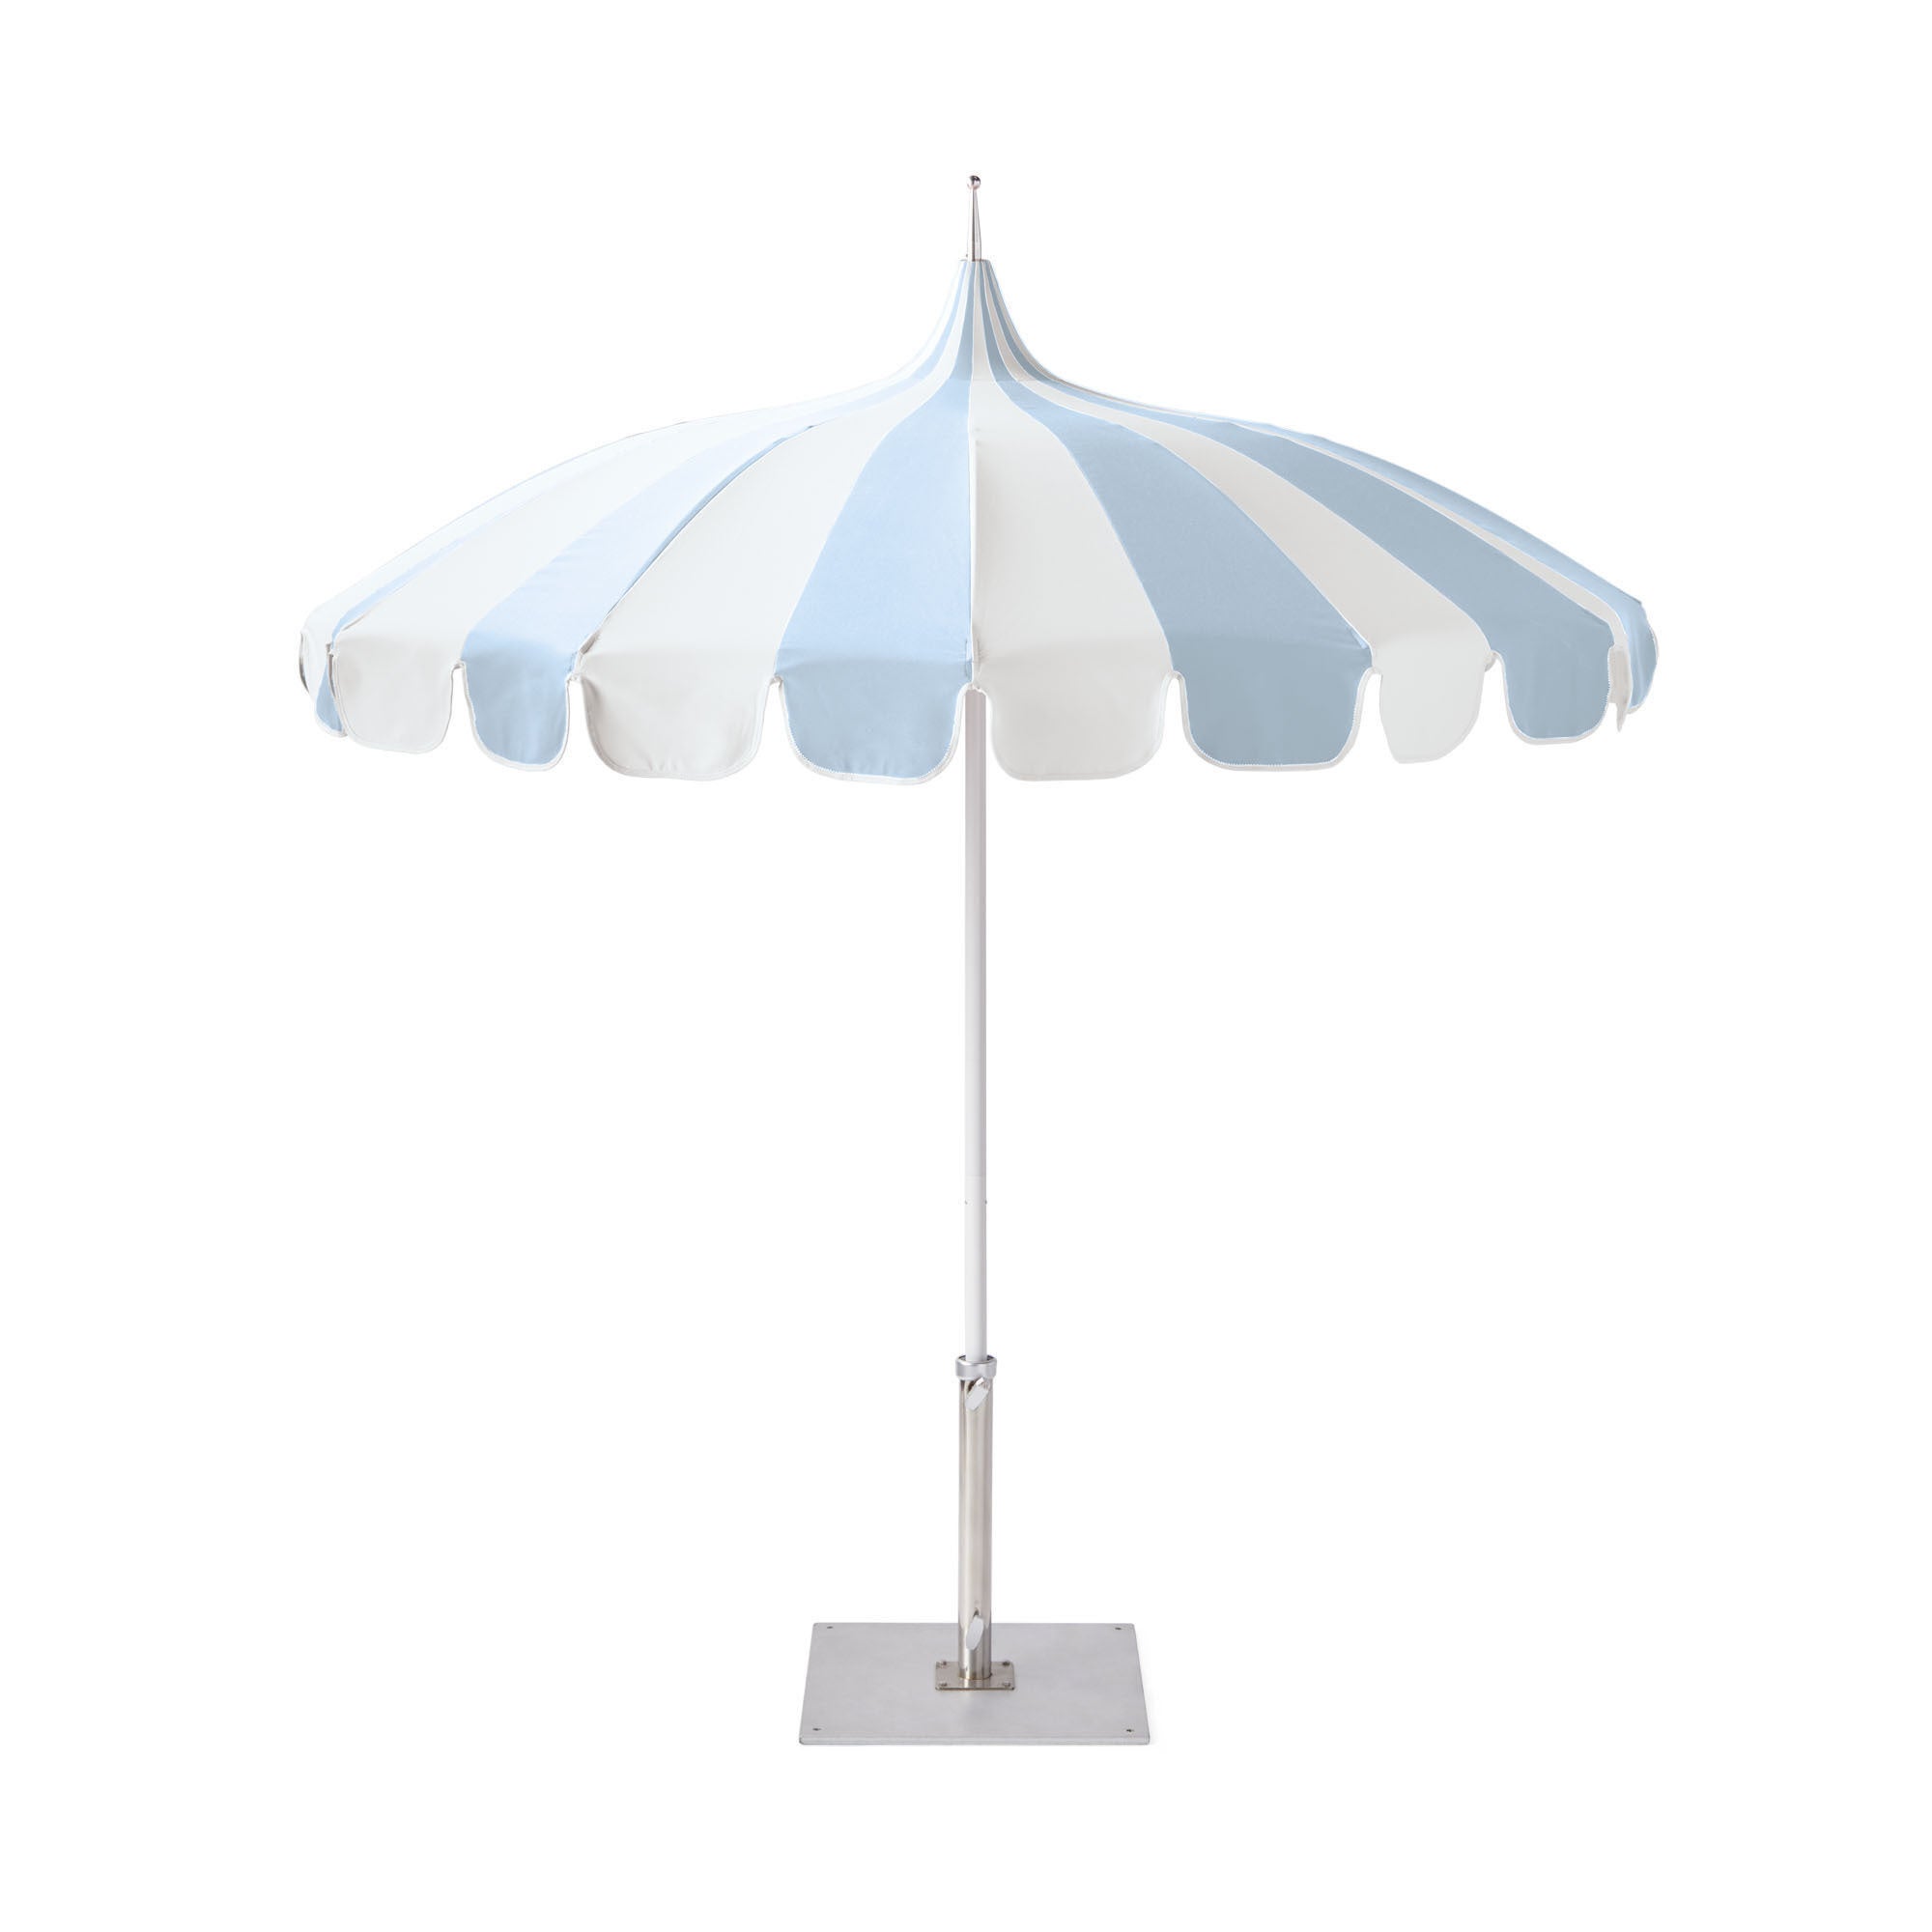 Our Favorite Windproof Serena & Lily Umbrella Is $260 Off for July 4th